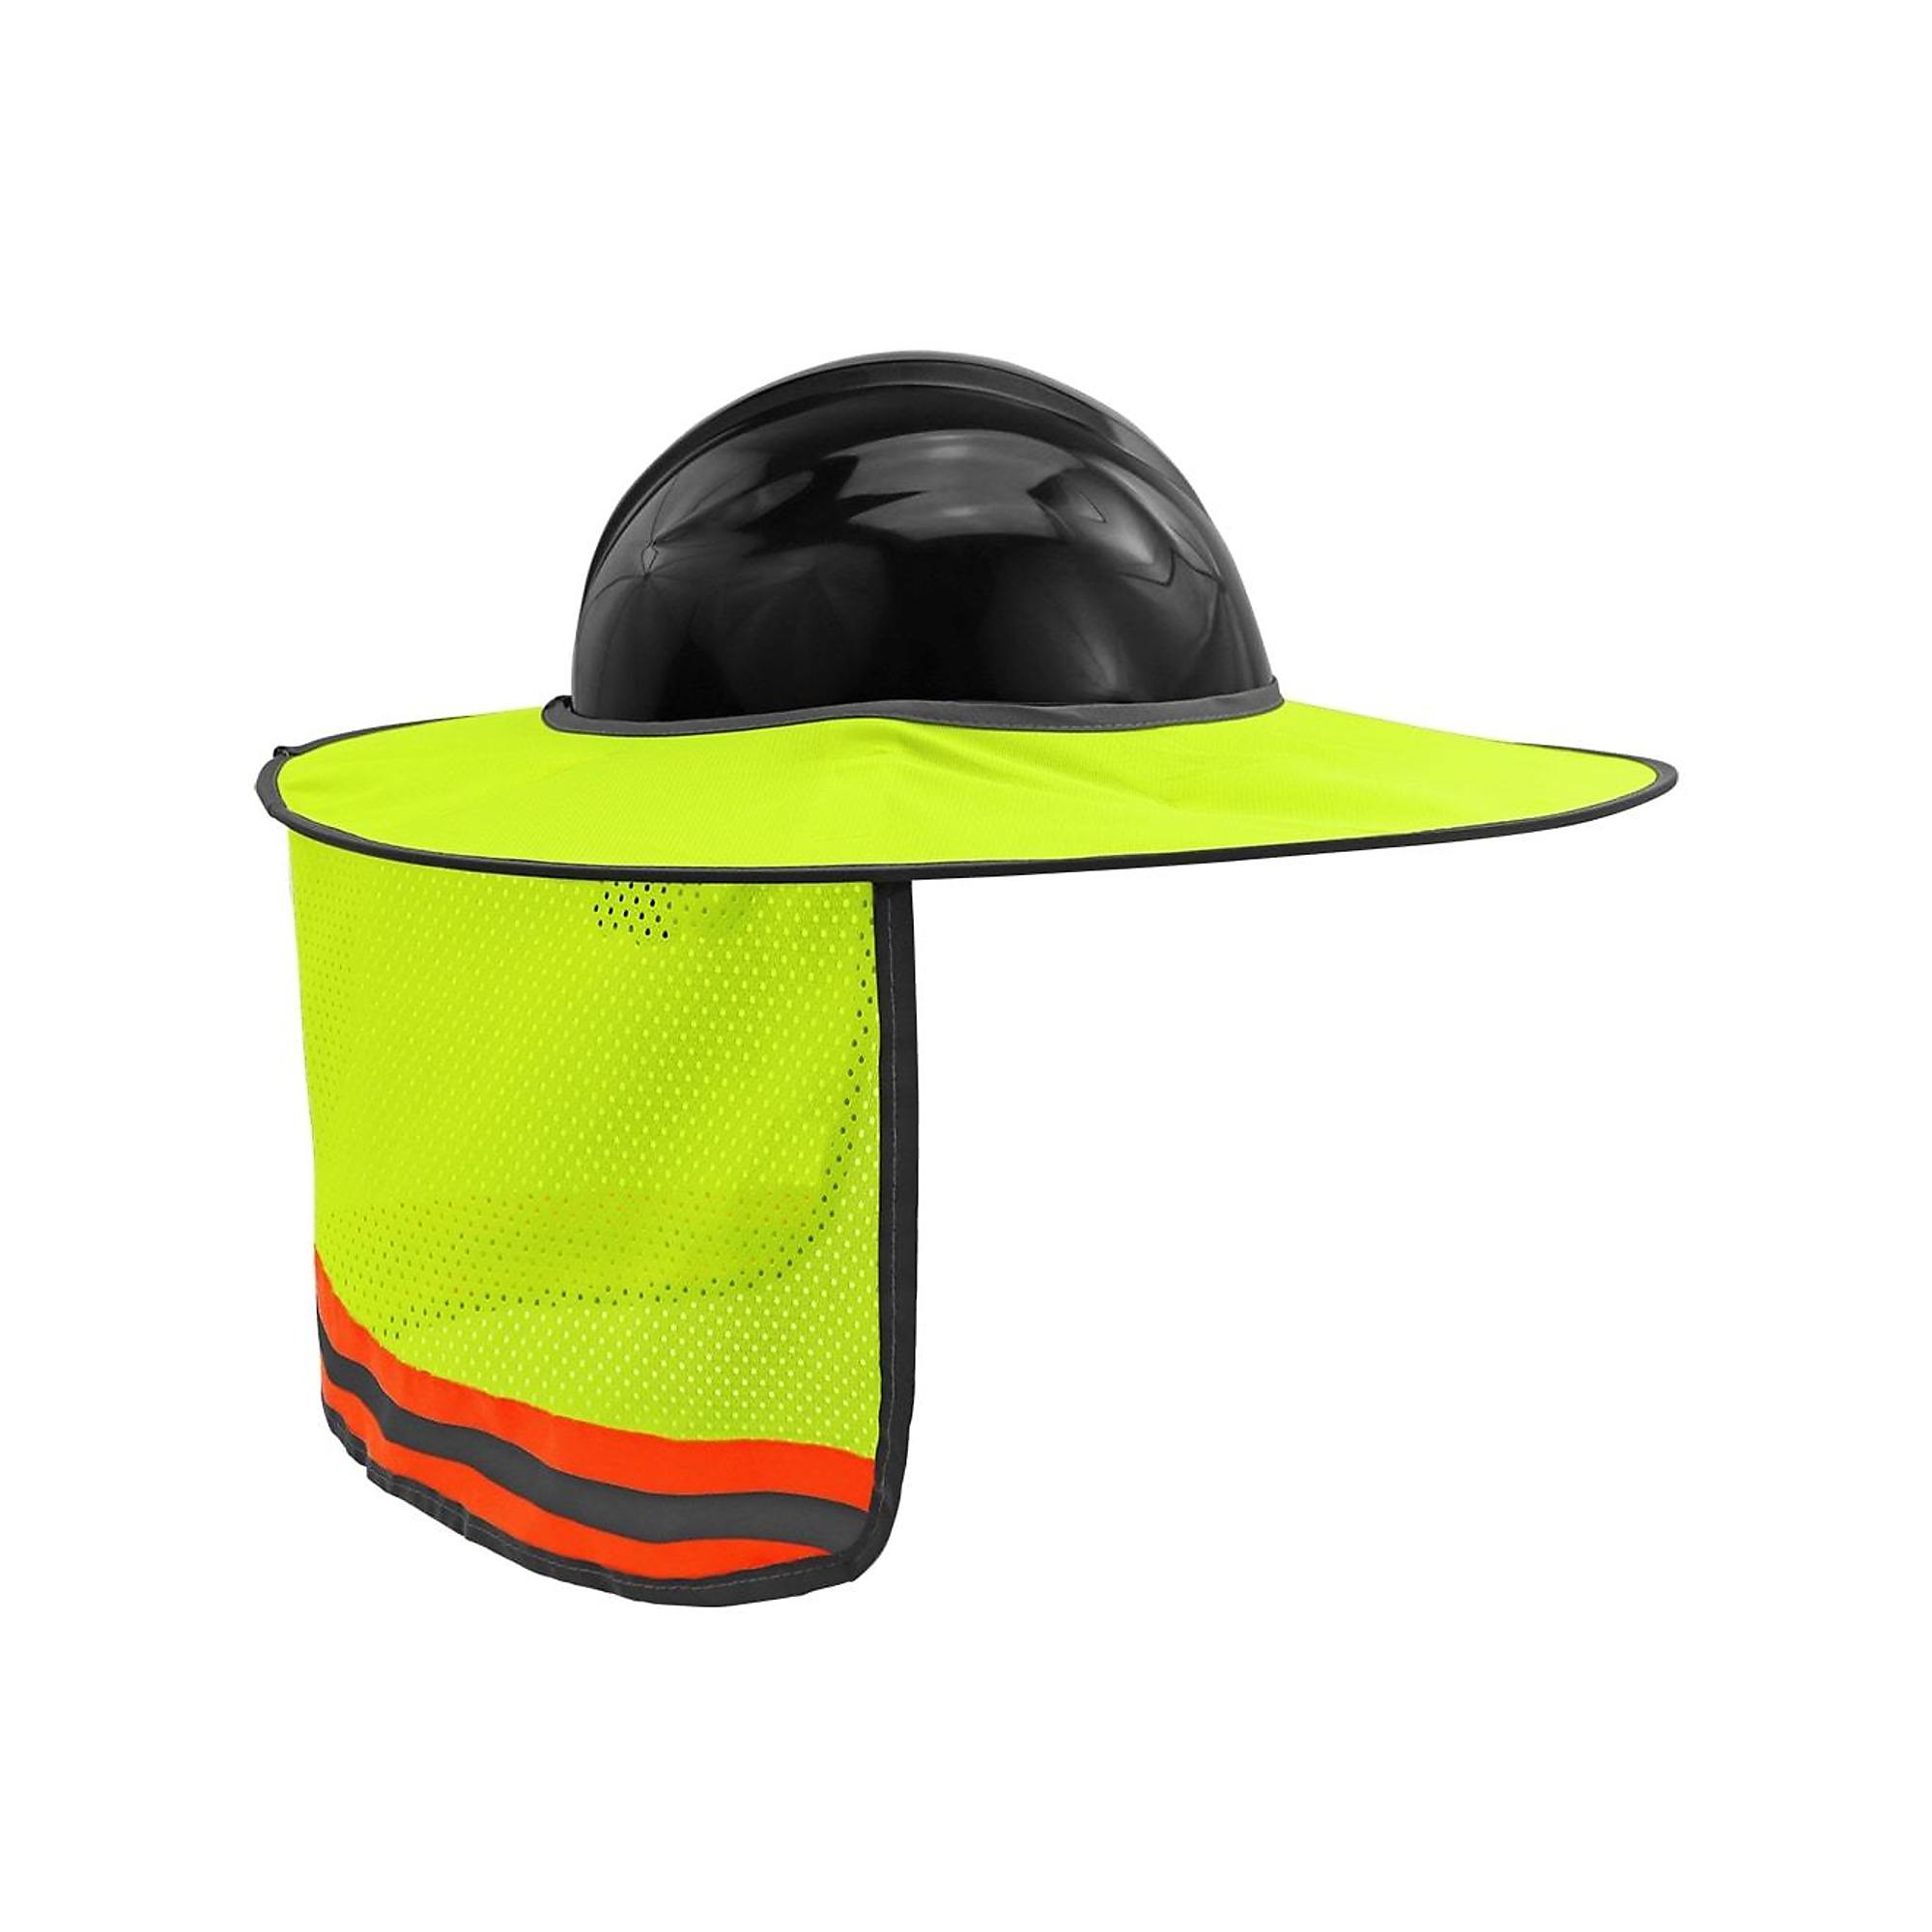 FrogWear, FrogWear HV Removable Hard Hat Sun Shade - 10 Each, Hard Hat Style Accessory, Hat Size One Size, Color Yellow, Model GLO-HNS1